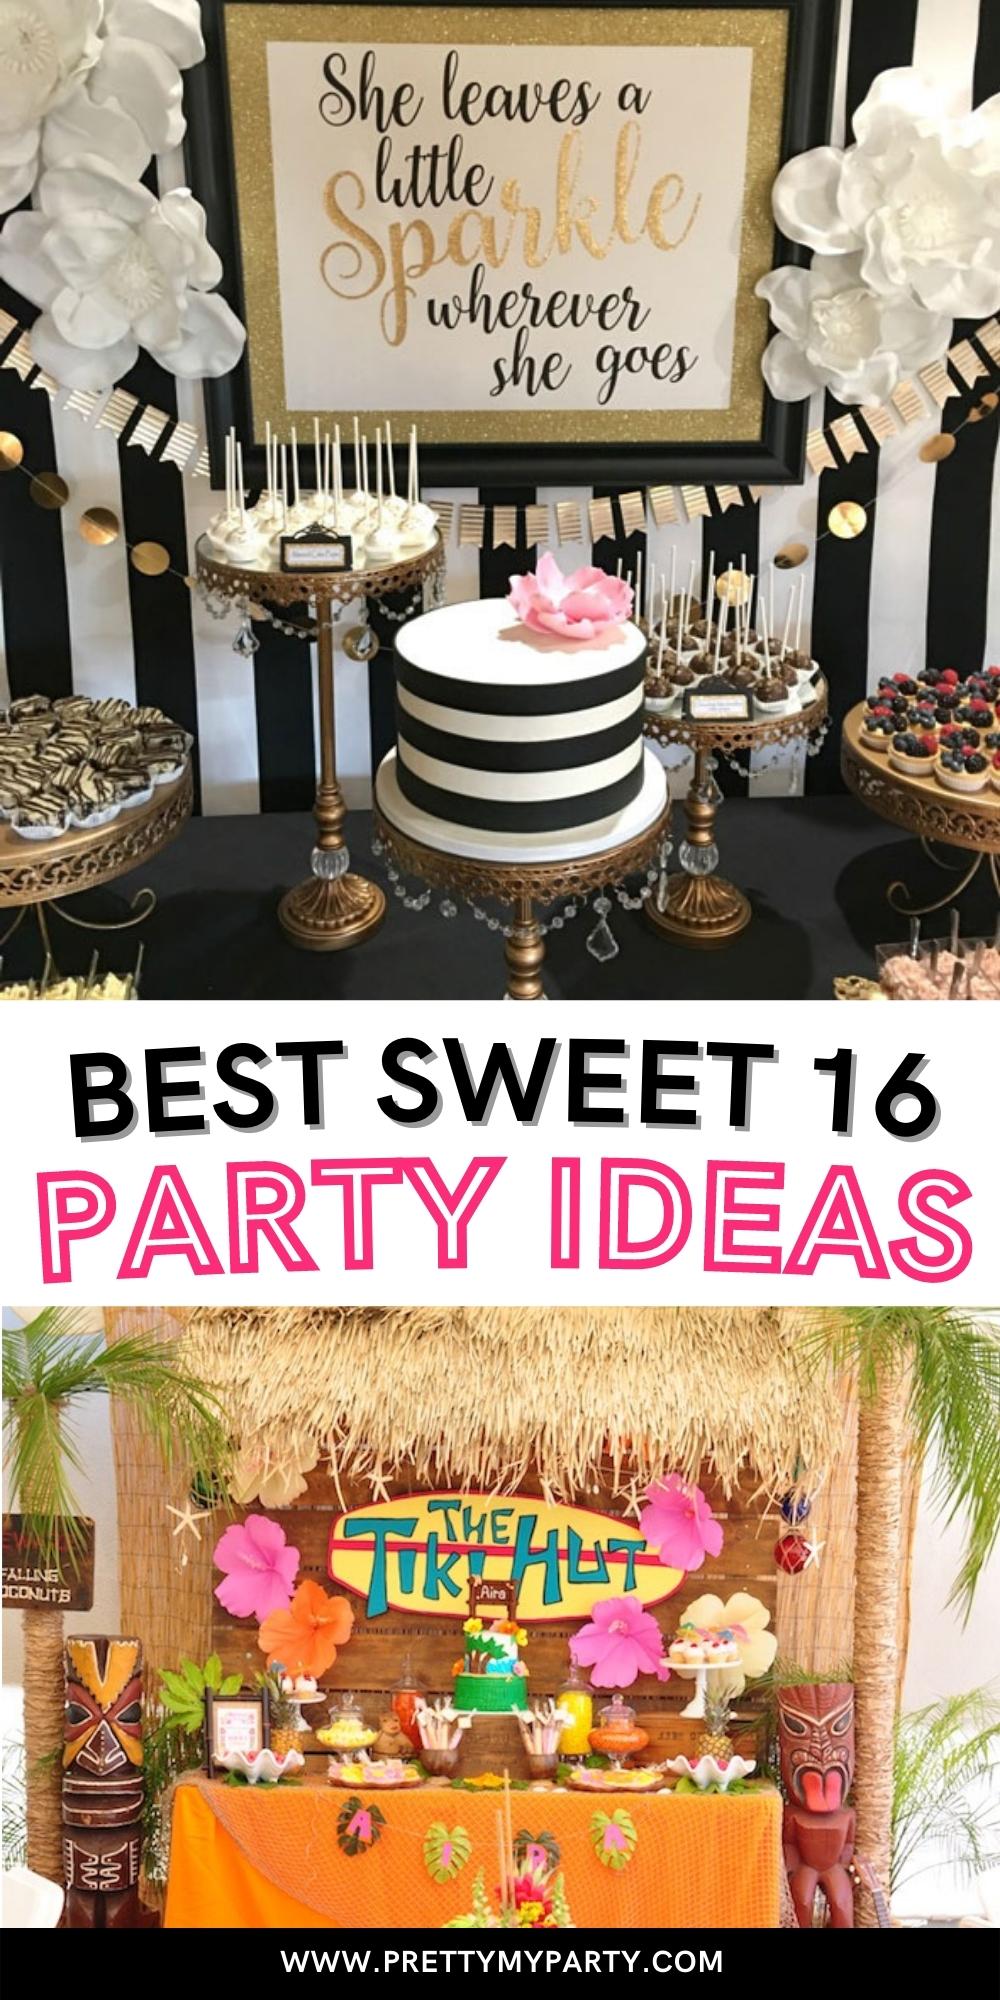 Best Sweet 16 Party Ideas and Themes